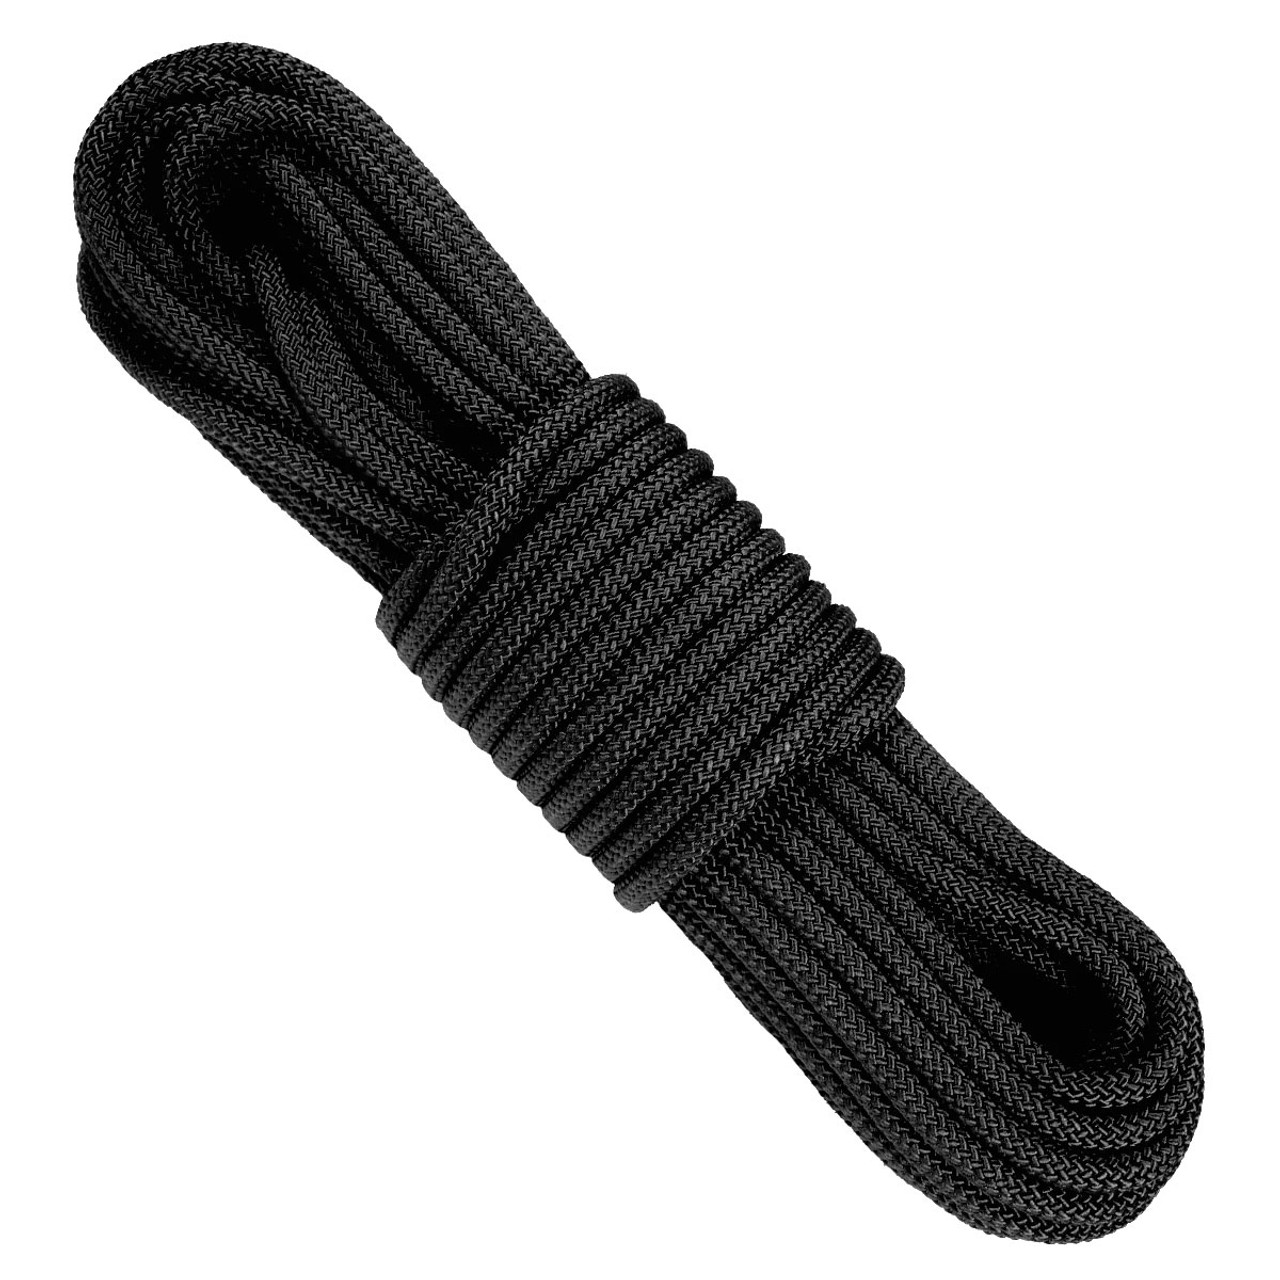 Atwood Rope Utility Rope 1/2 x 100 ft., Black